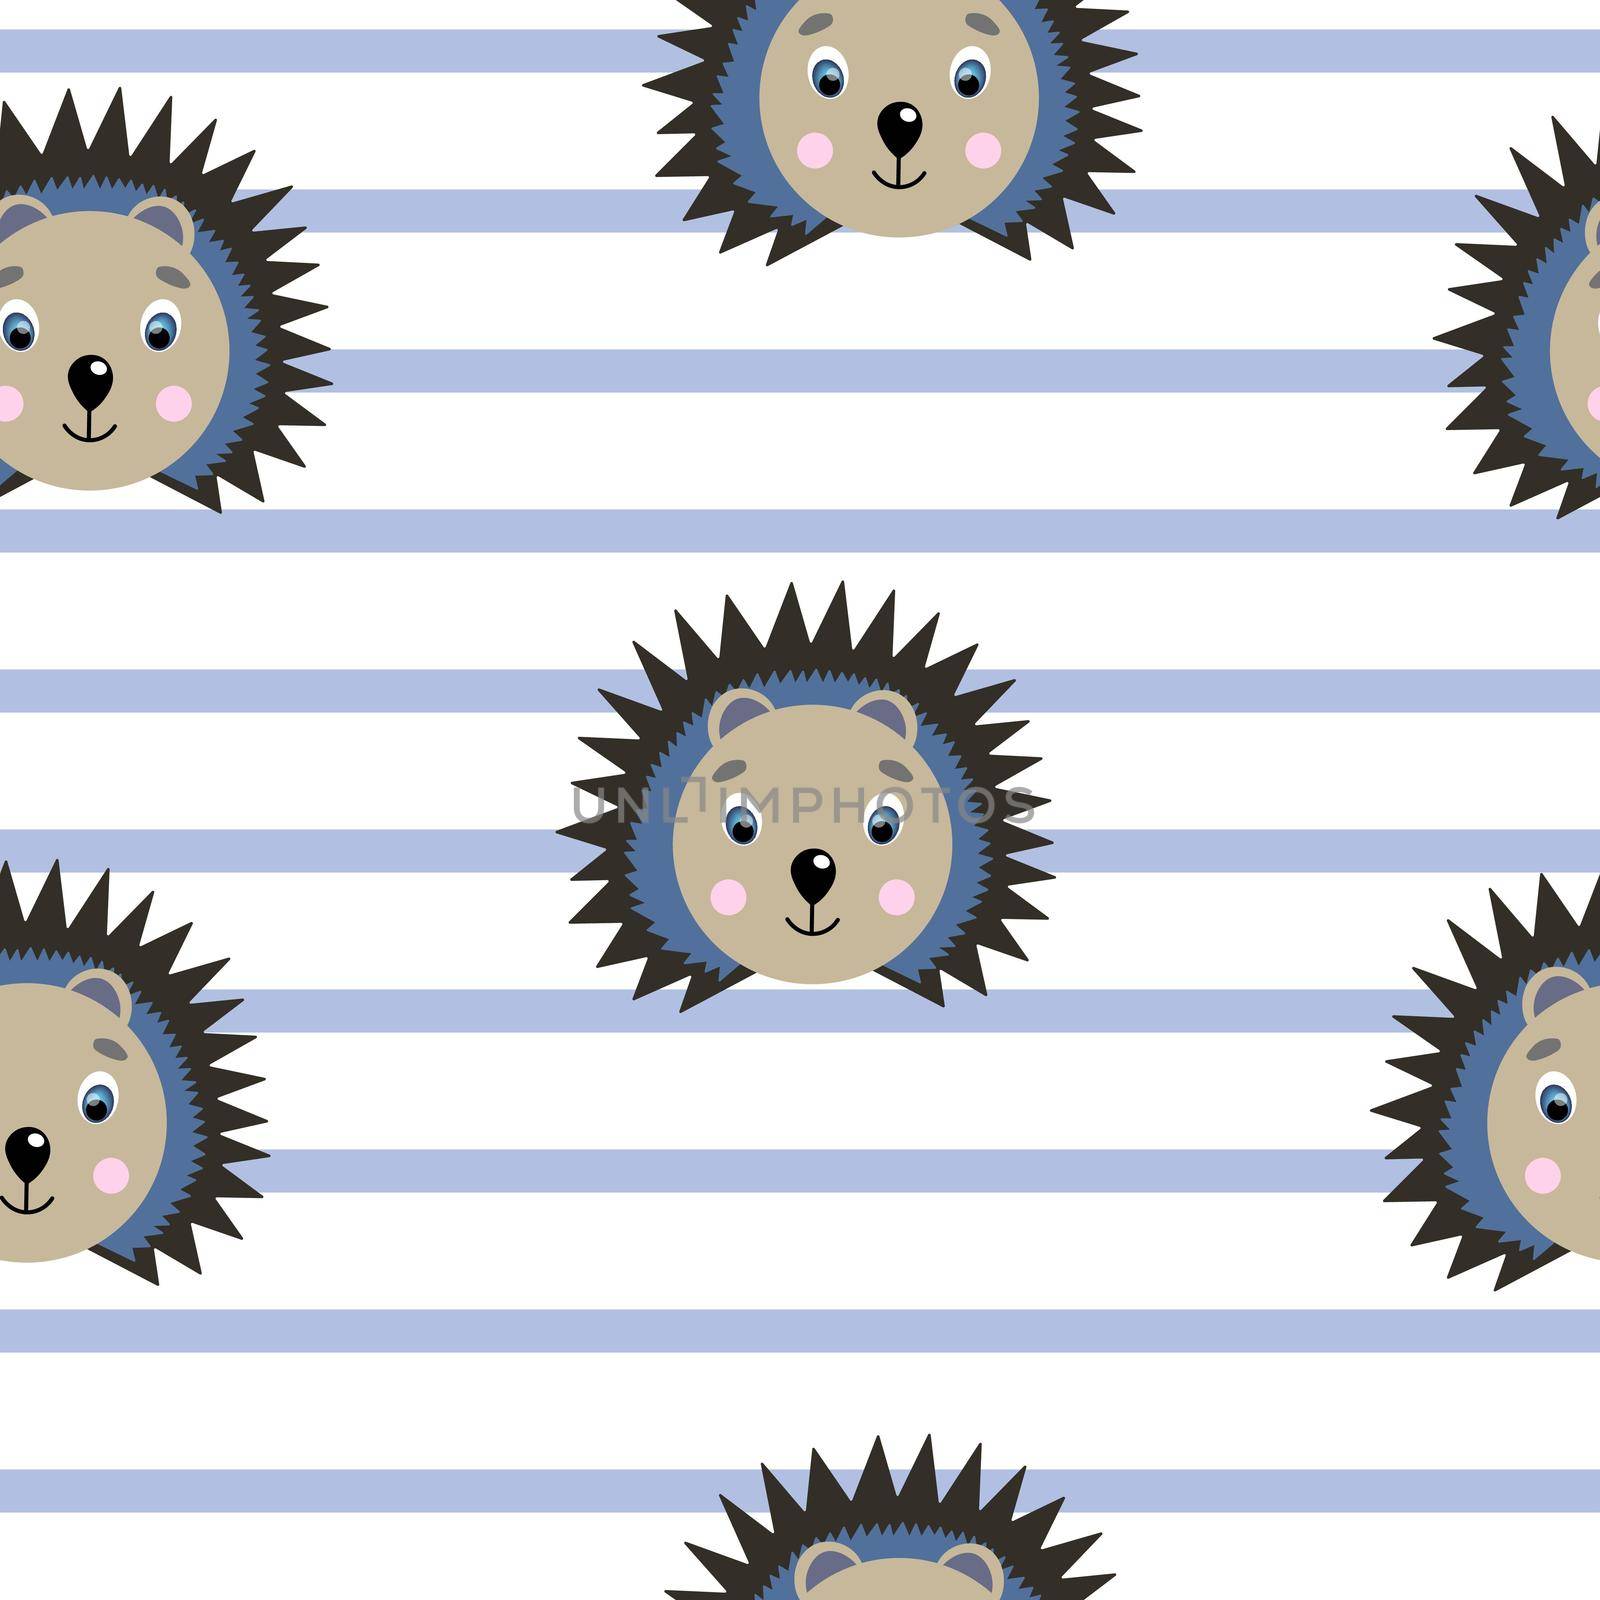 Vector flat animals colorful illustration for kids. Seamless pattern with cute hedgehog face on white striped background. Adorable cartoon character. Design for card, poster, fabric, textile.